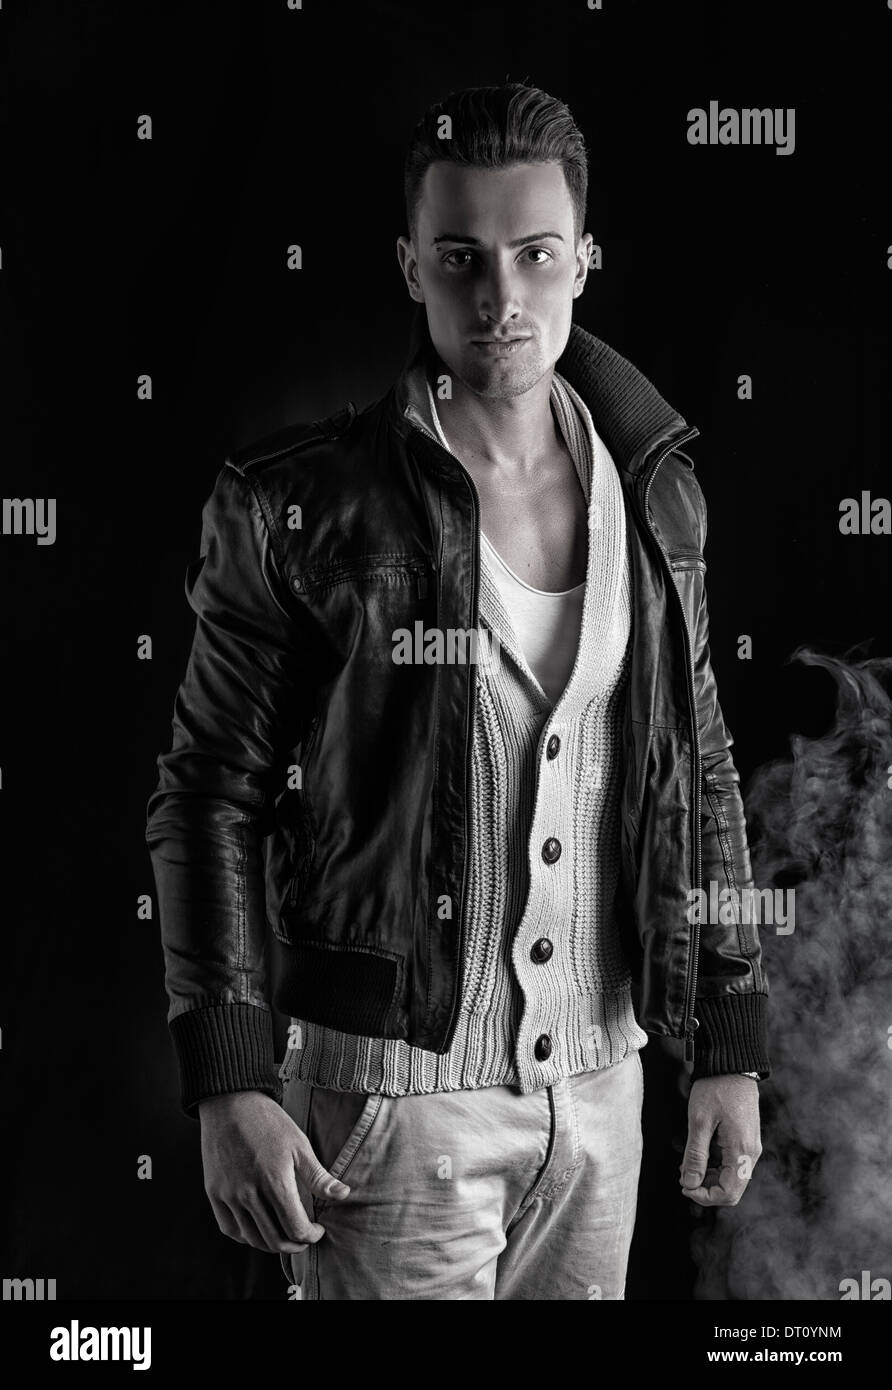 Attractive young man with white sweater and black leather jacket. Smoke and dark background. Stock Photo